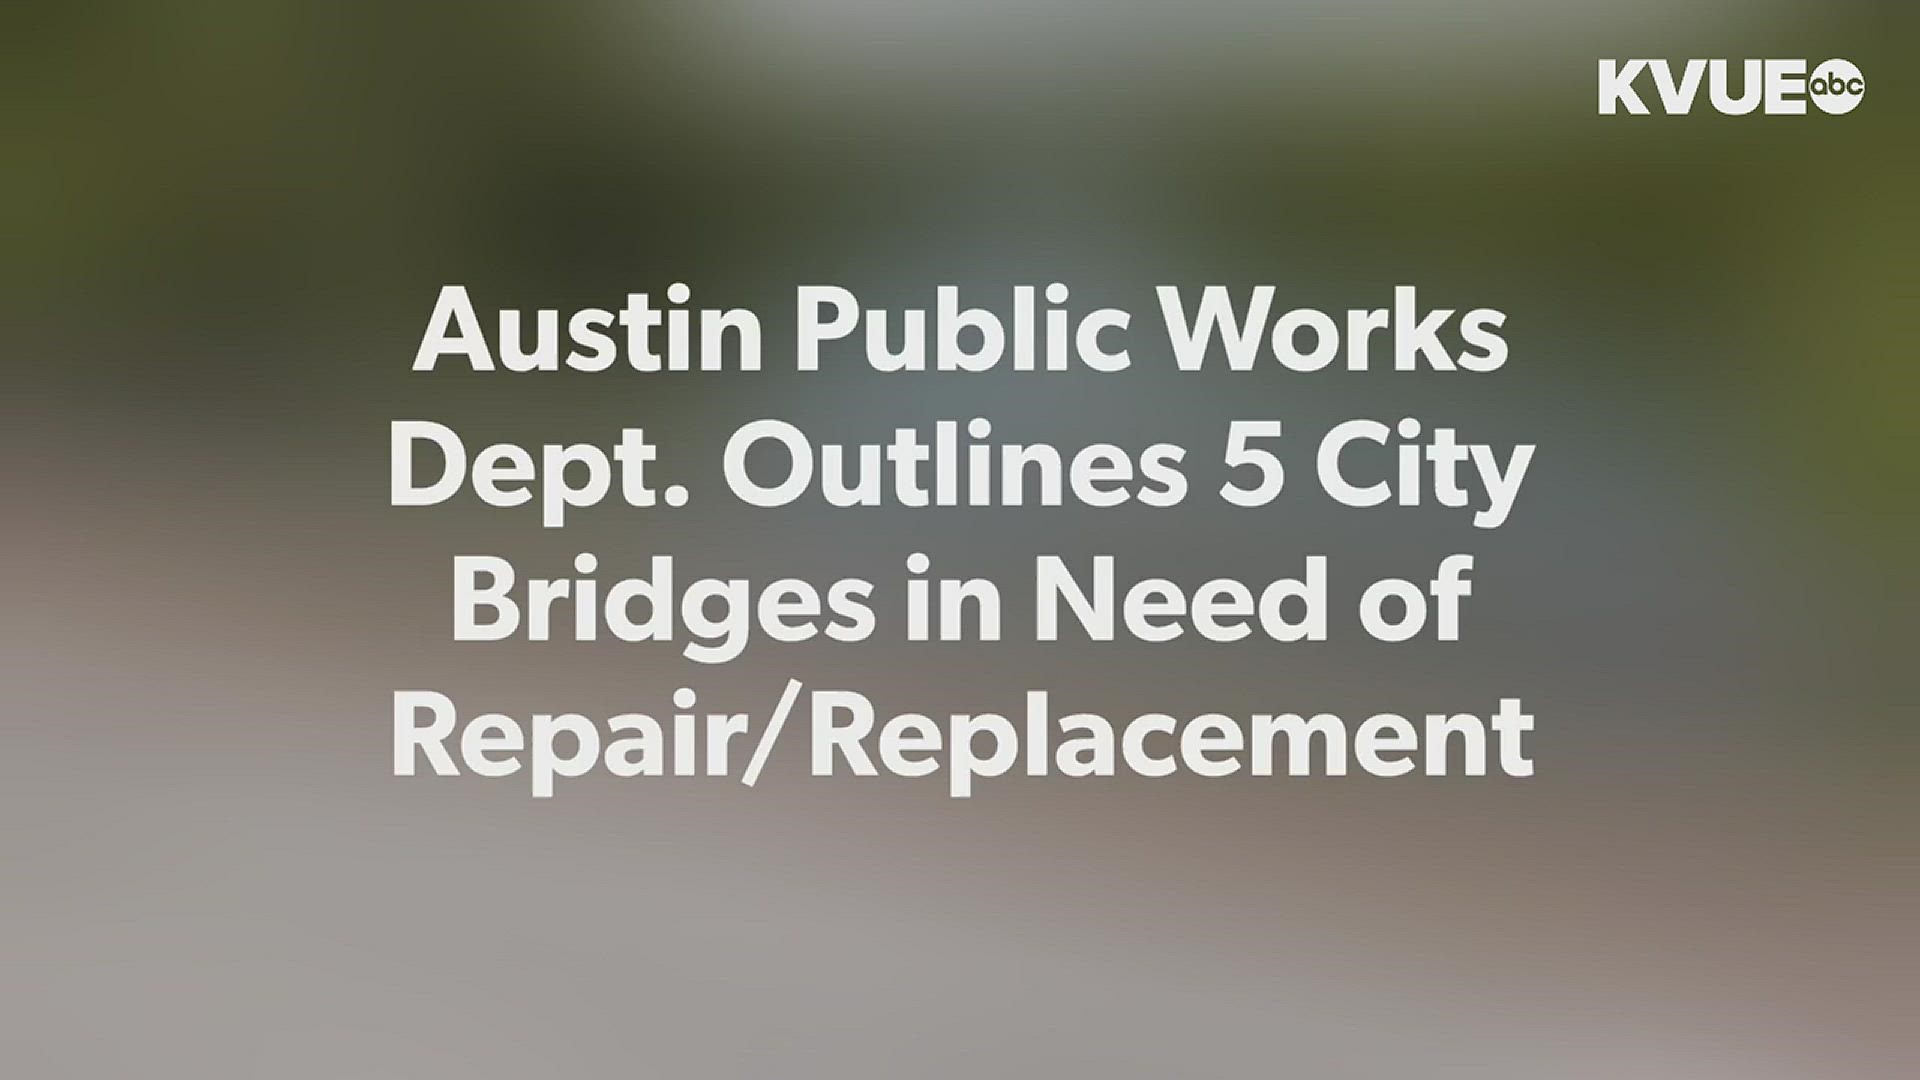 The Austin Public Works department has outline five local bridges it says are in need of repairs.